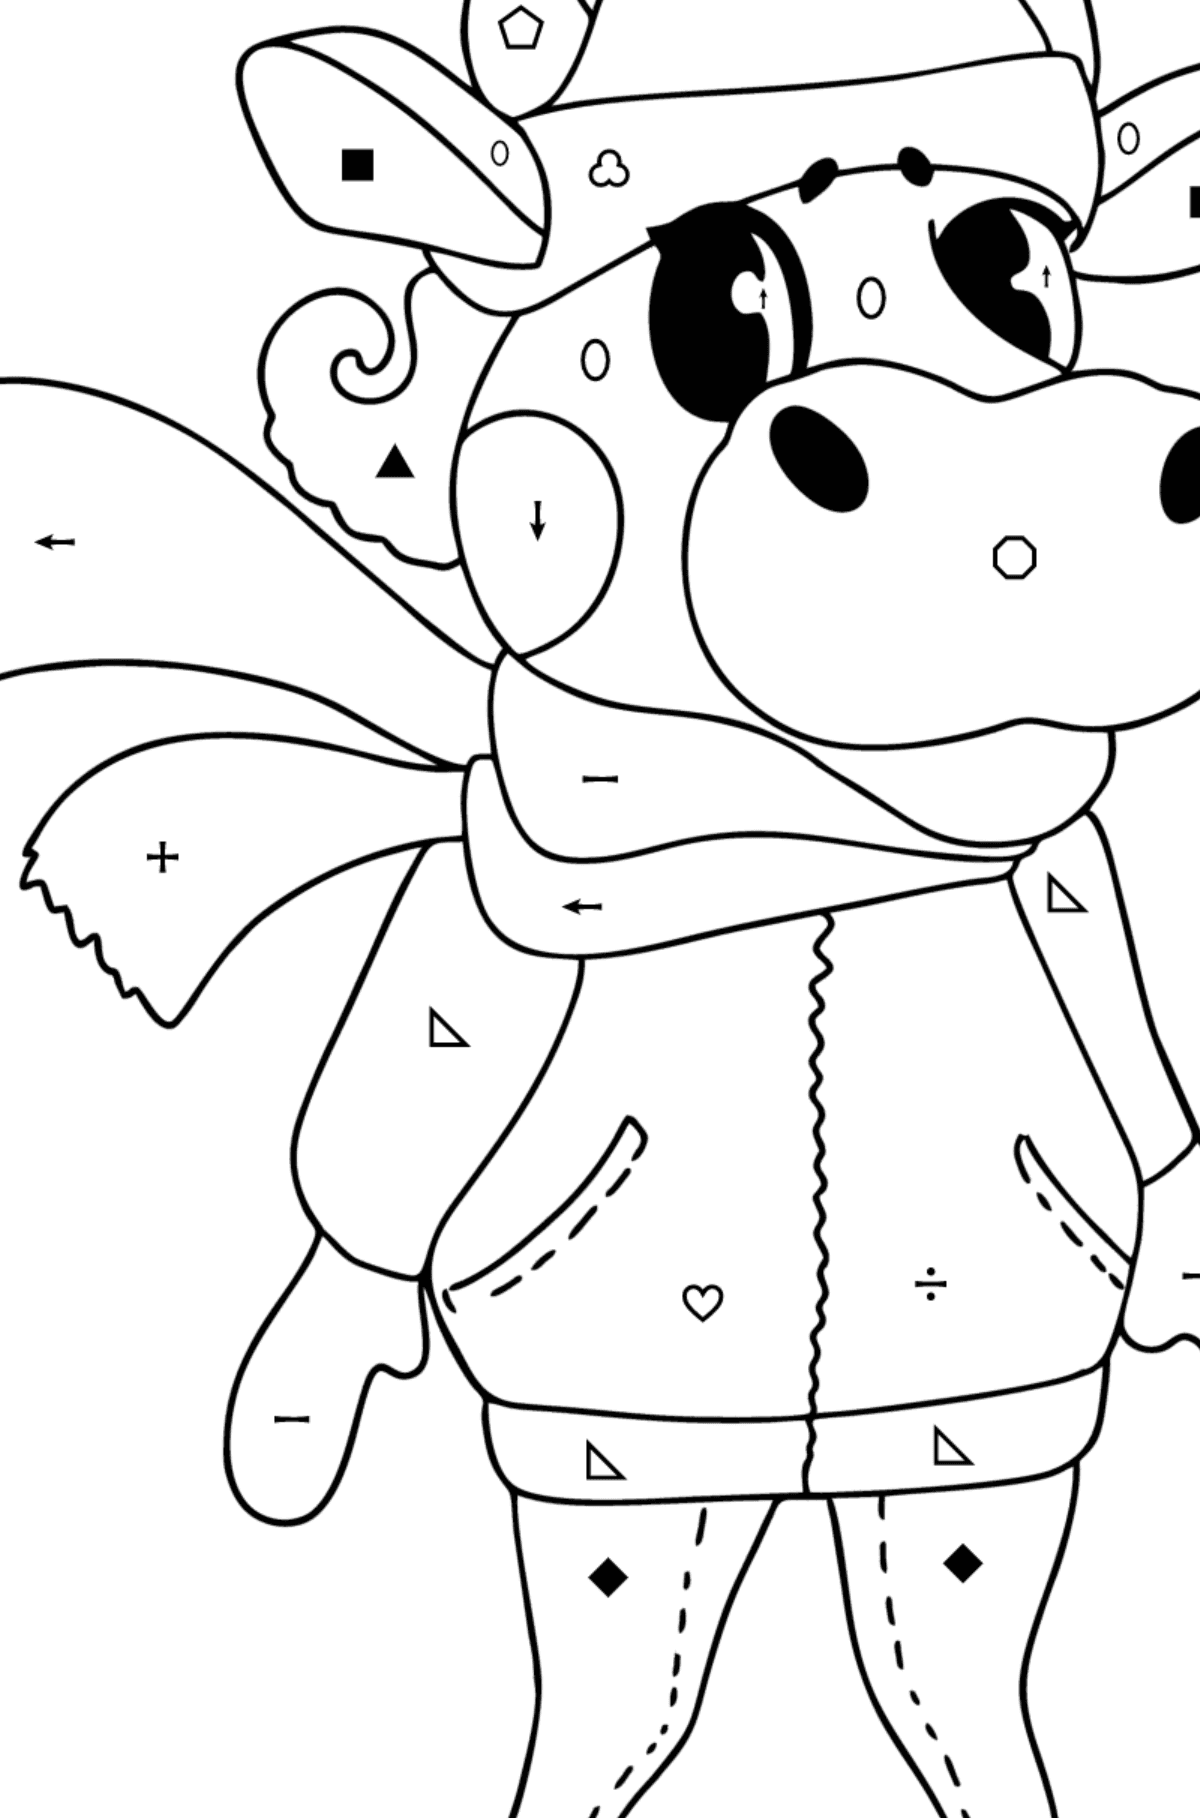 Kawaii cow coloring page - Coloring by Symbols and Geometric Shapes for Kids